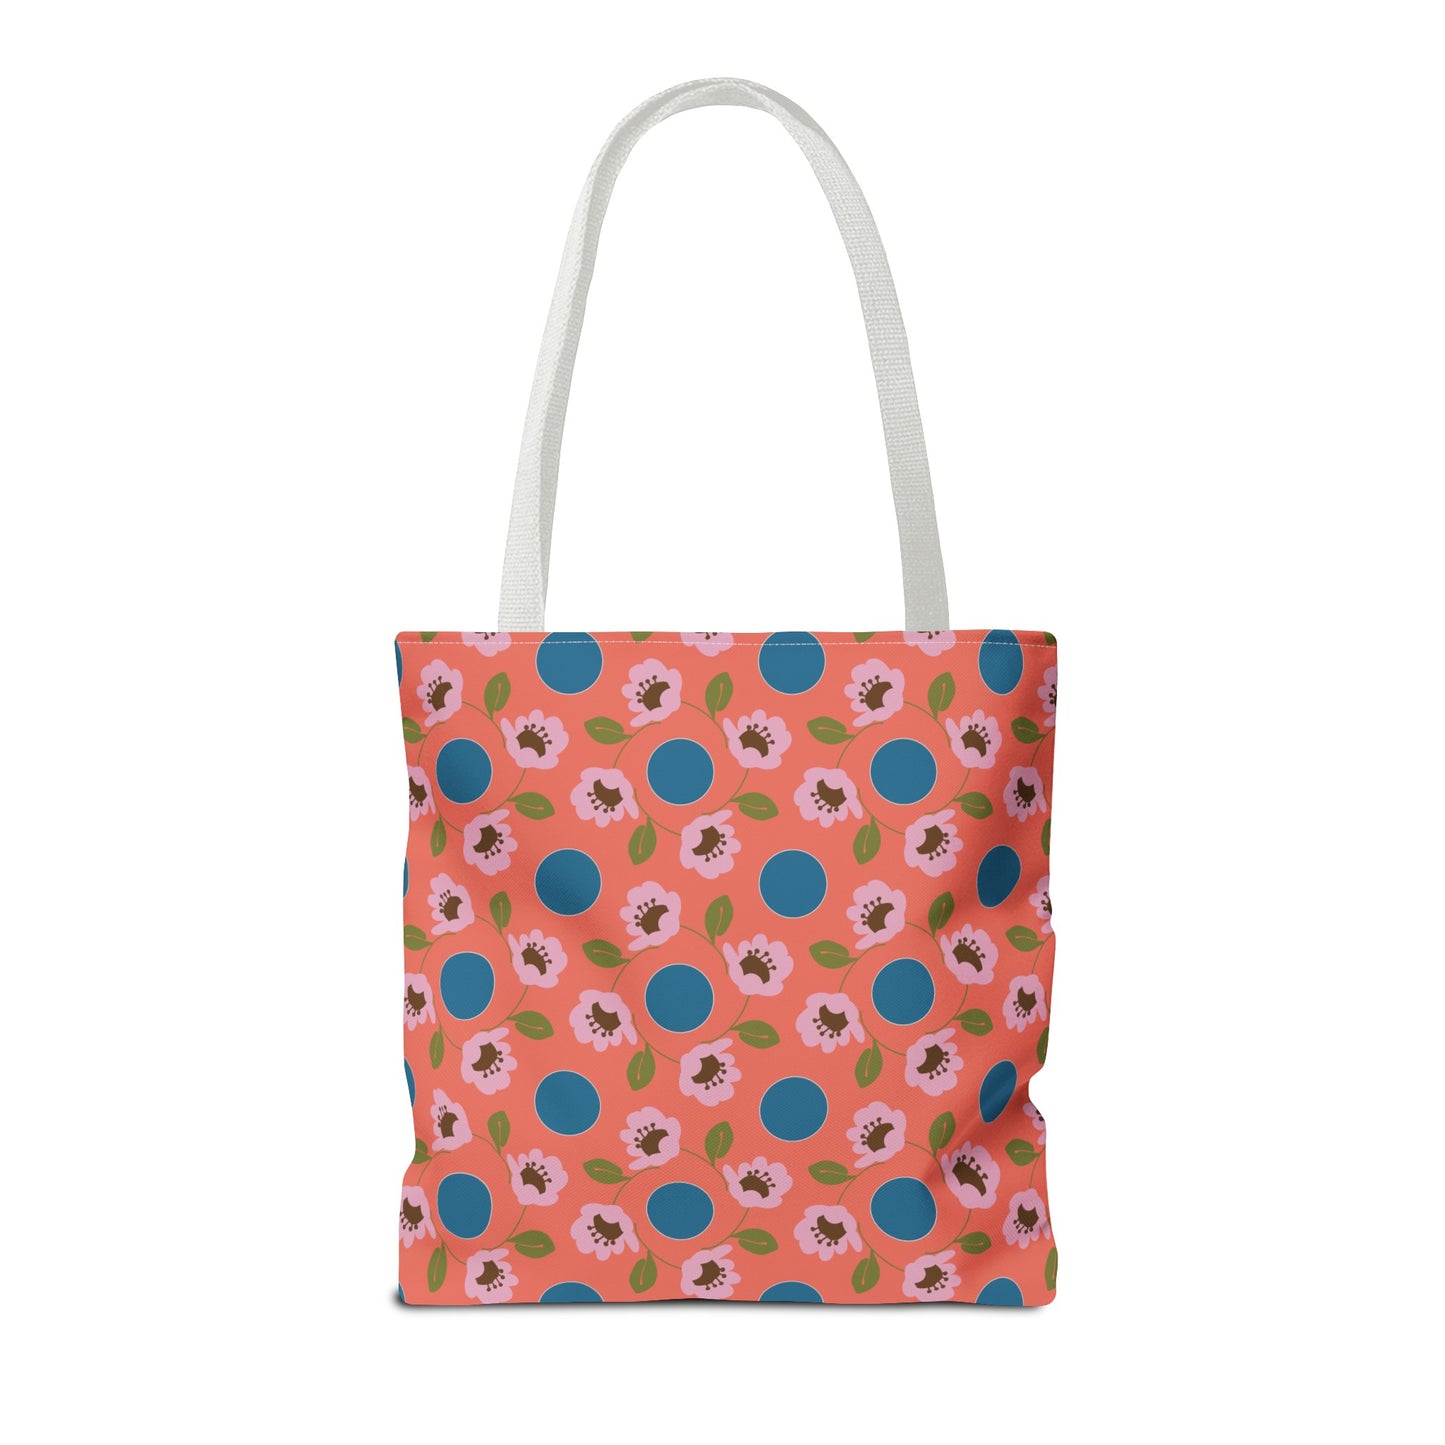 Wildflowers with Dots in Coral and Blue Tote Bag